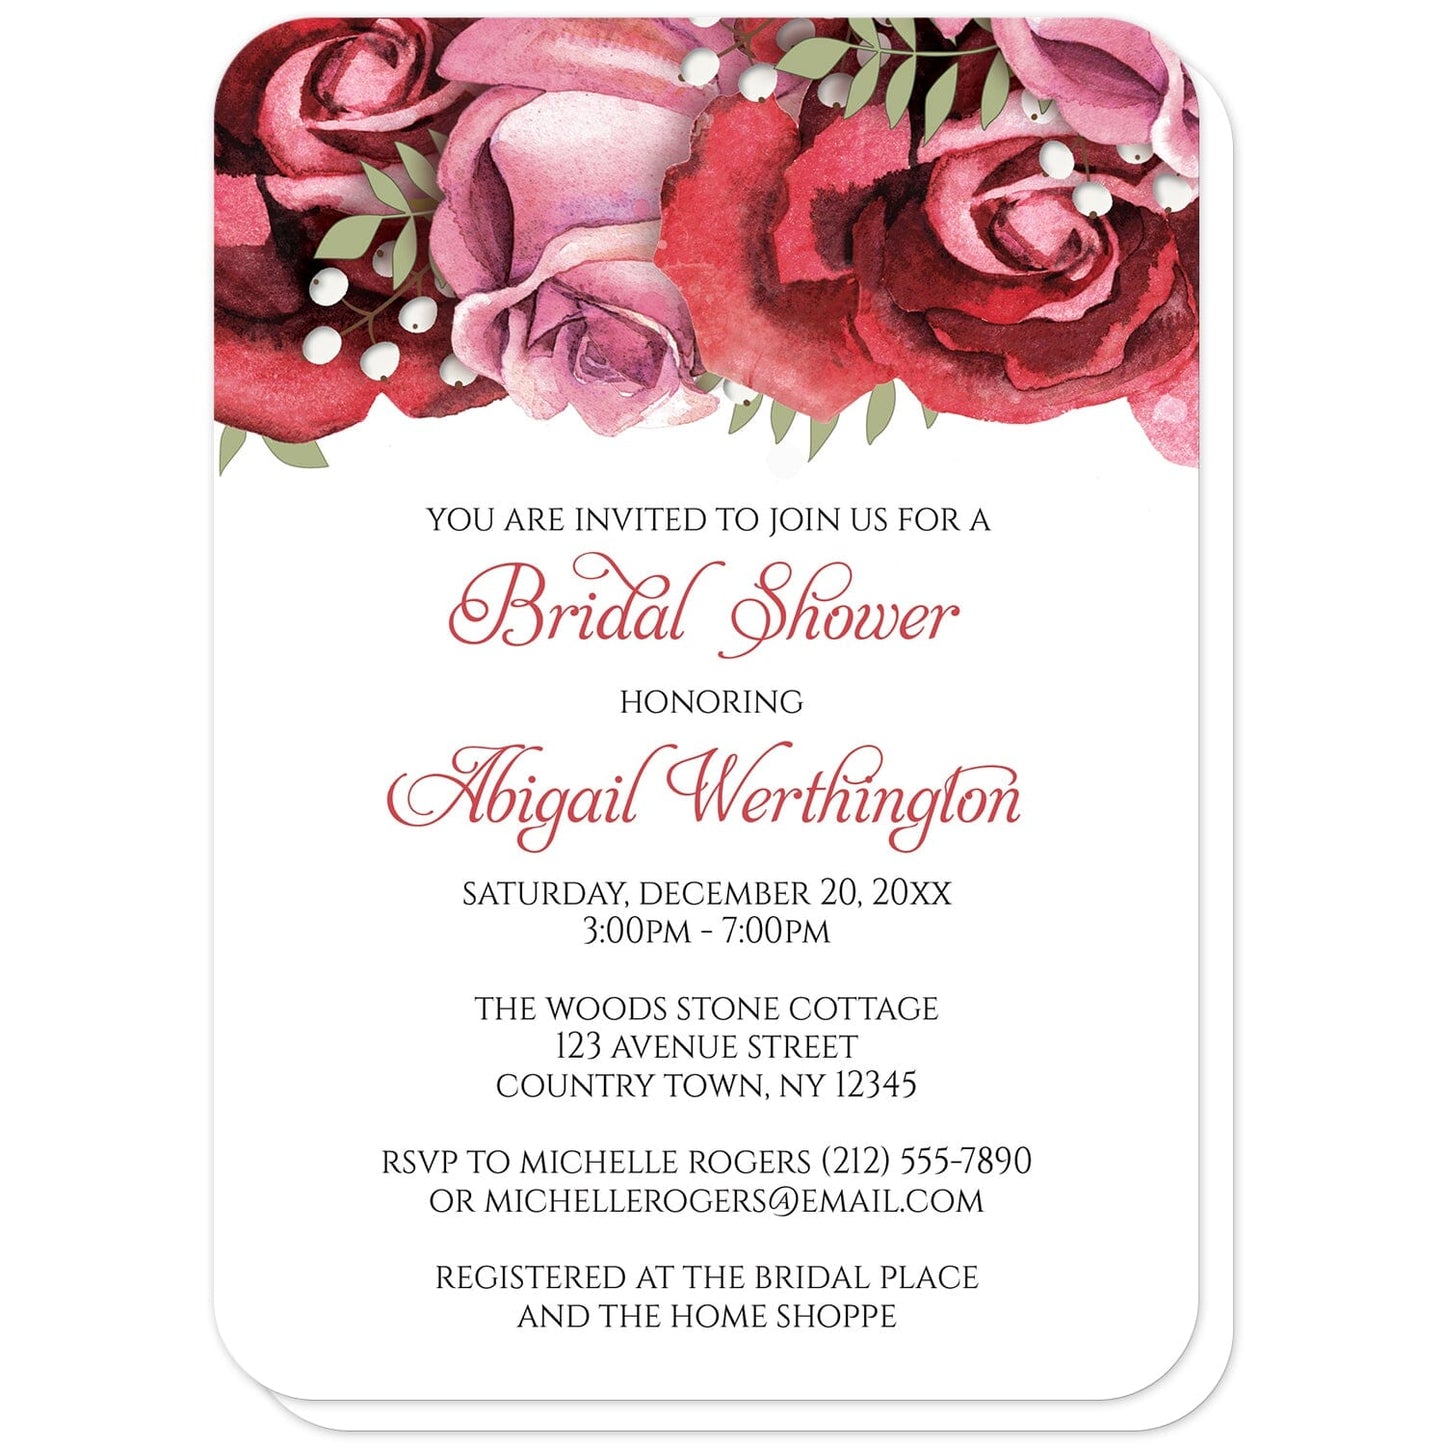 Burgundy Red Pink Rose Bridal Shower Invitations (with rounded corners) at Artistically Invited. Burgundy red pink rose bridal shower invitations with gorgeous burgundy red and pink roses along the top. Your personalized bridal shower celebration details are printed in in burgundy and black on white below the beautiful roses illustration.